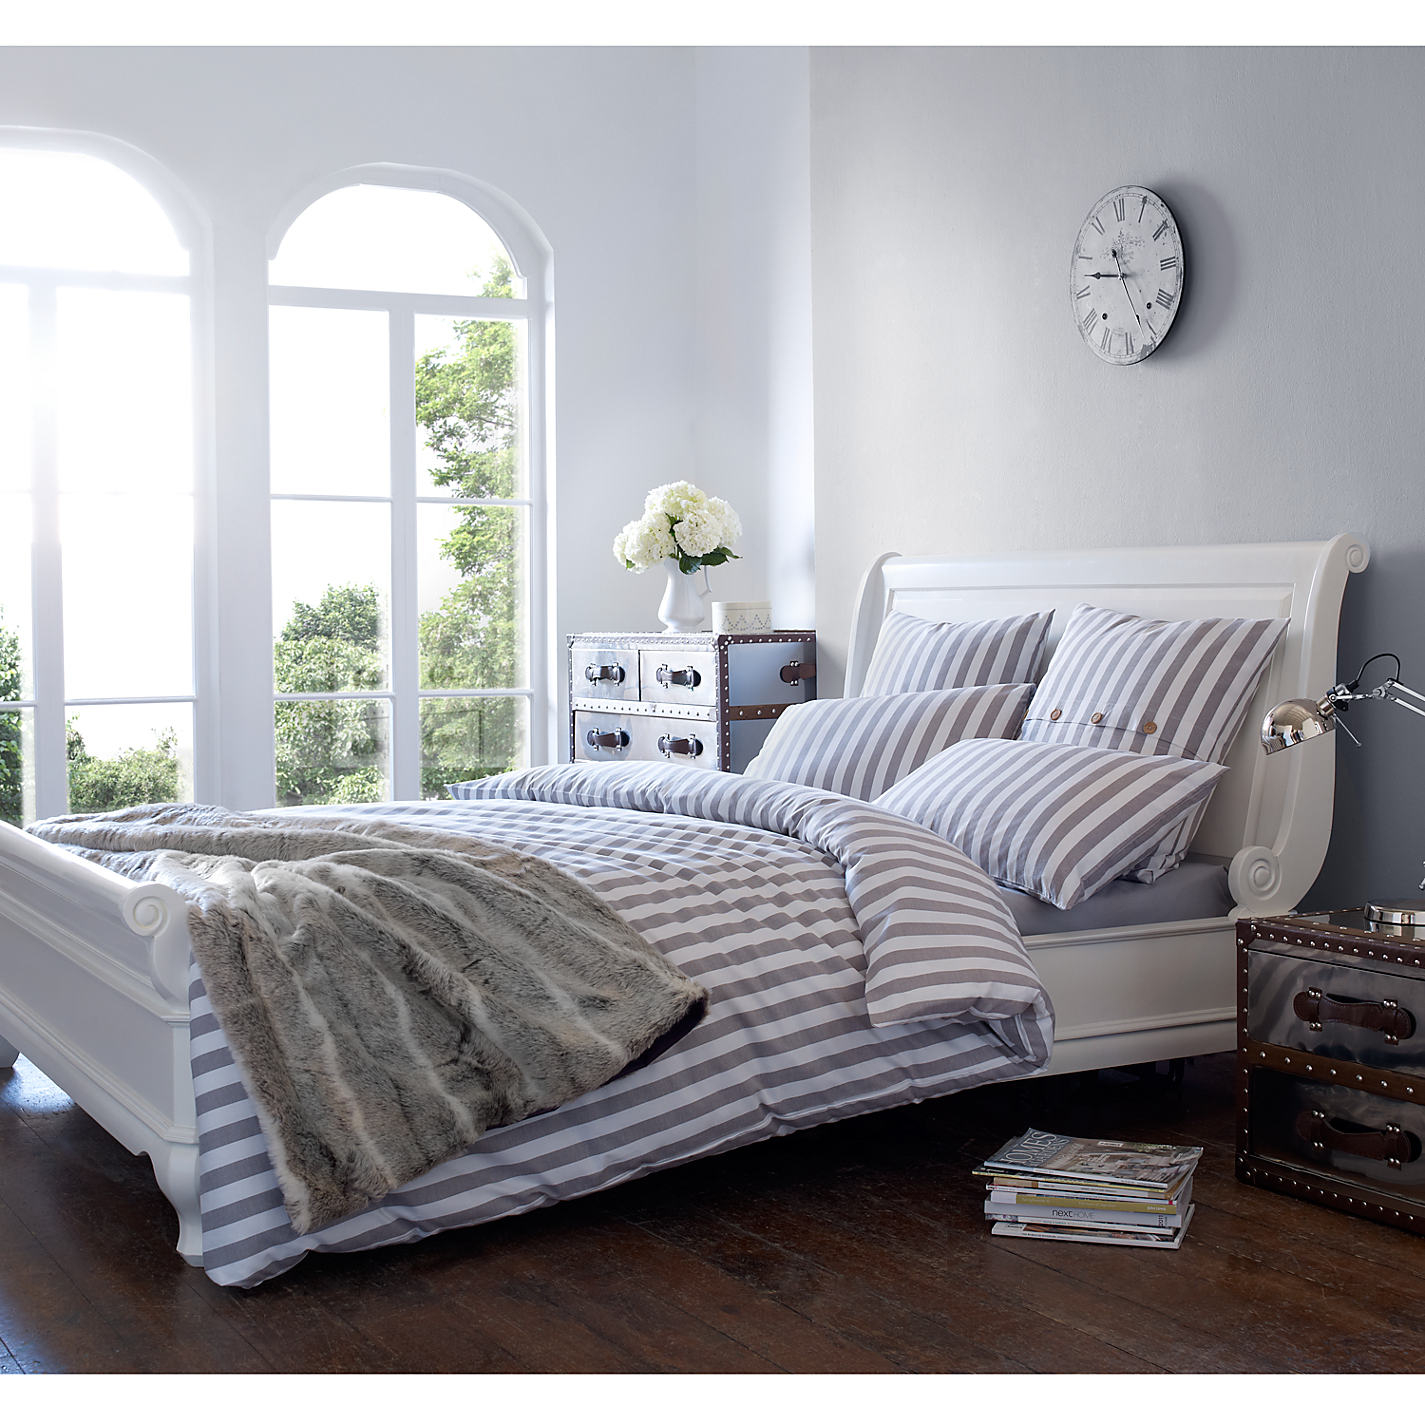 Nautical Furniture Sets Today Bedroom Image Style French Style regarding dimensions 1425 X 1425